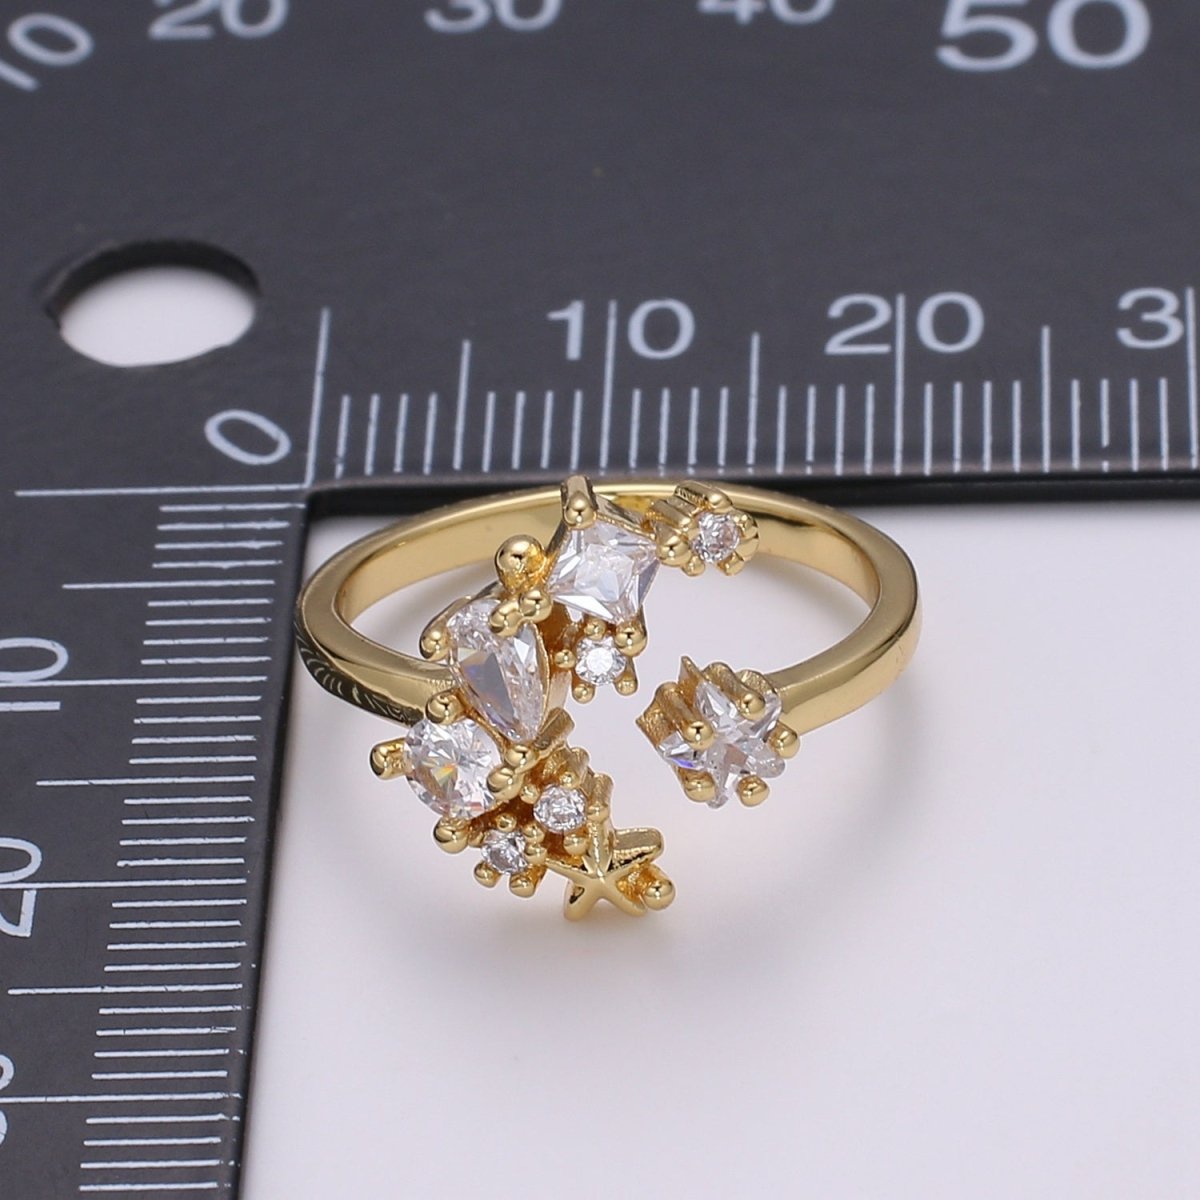 24k Gold Filled One Size Fits All Adjustable Moon Ring With Micro CZ Stones For Jewelry Making Supplies Celestial Jewelry R328 - DLUXCA